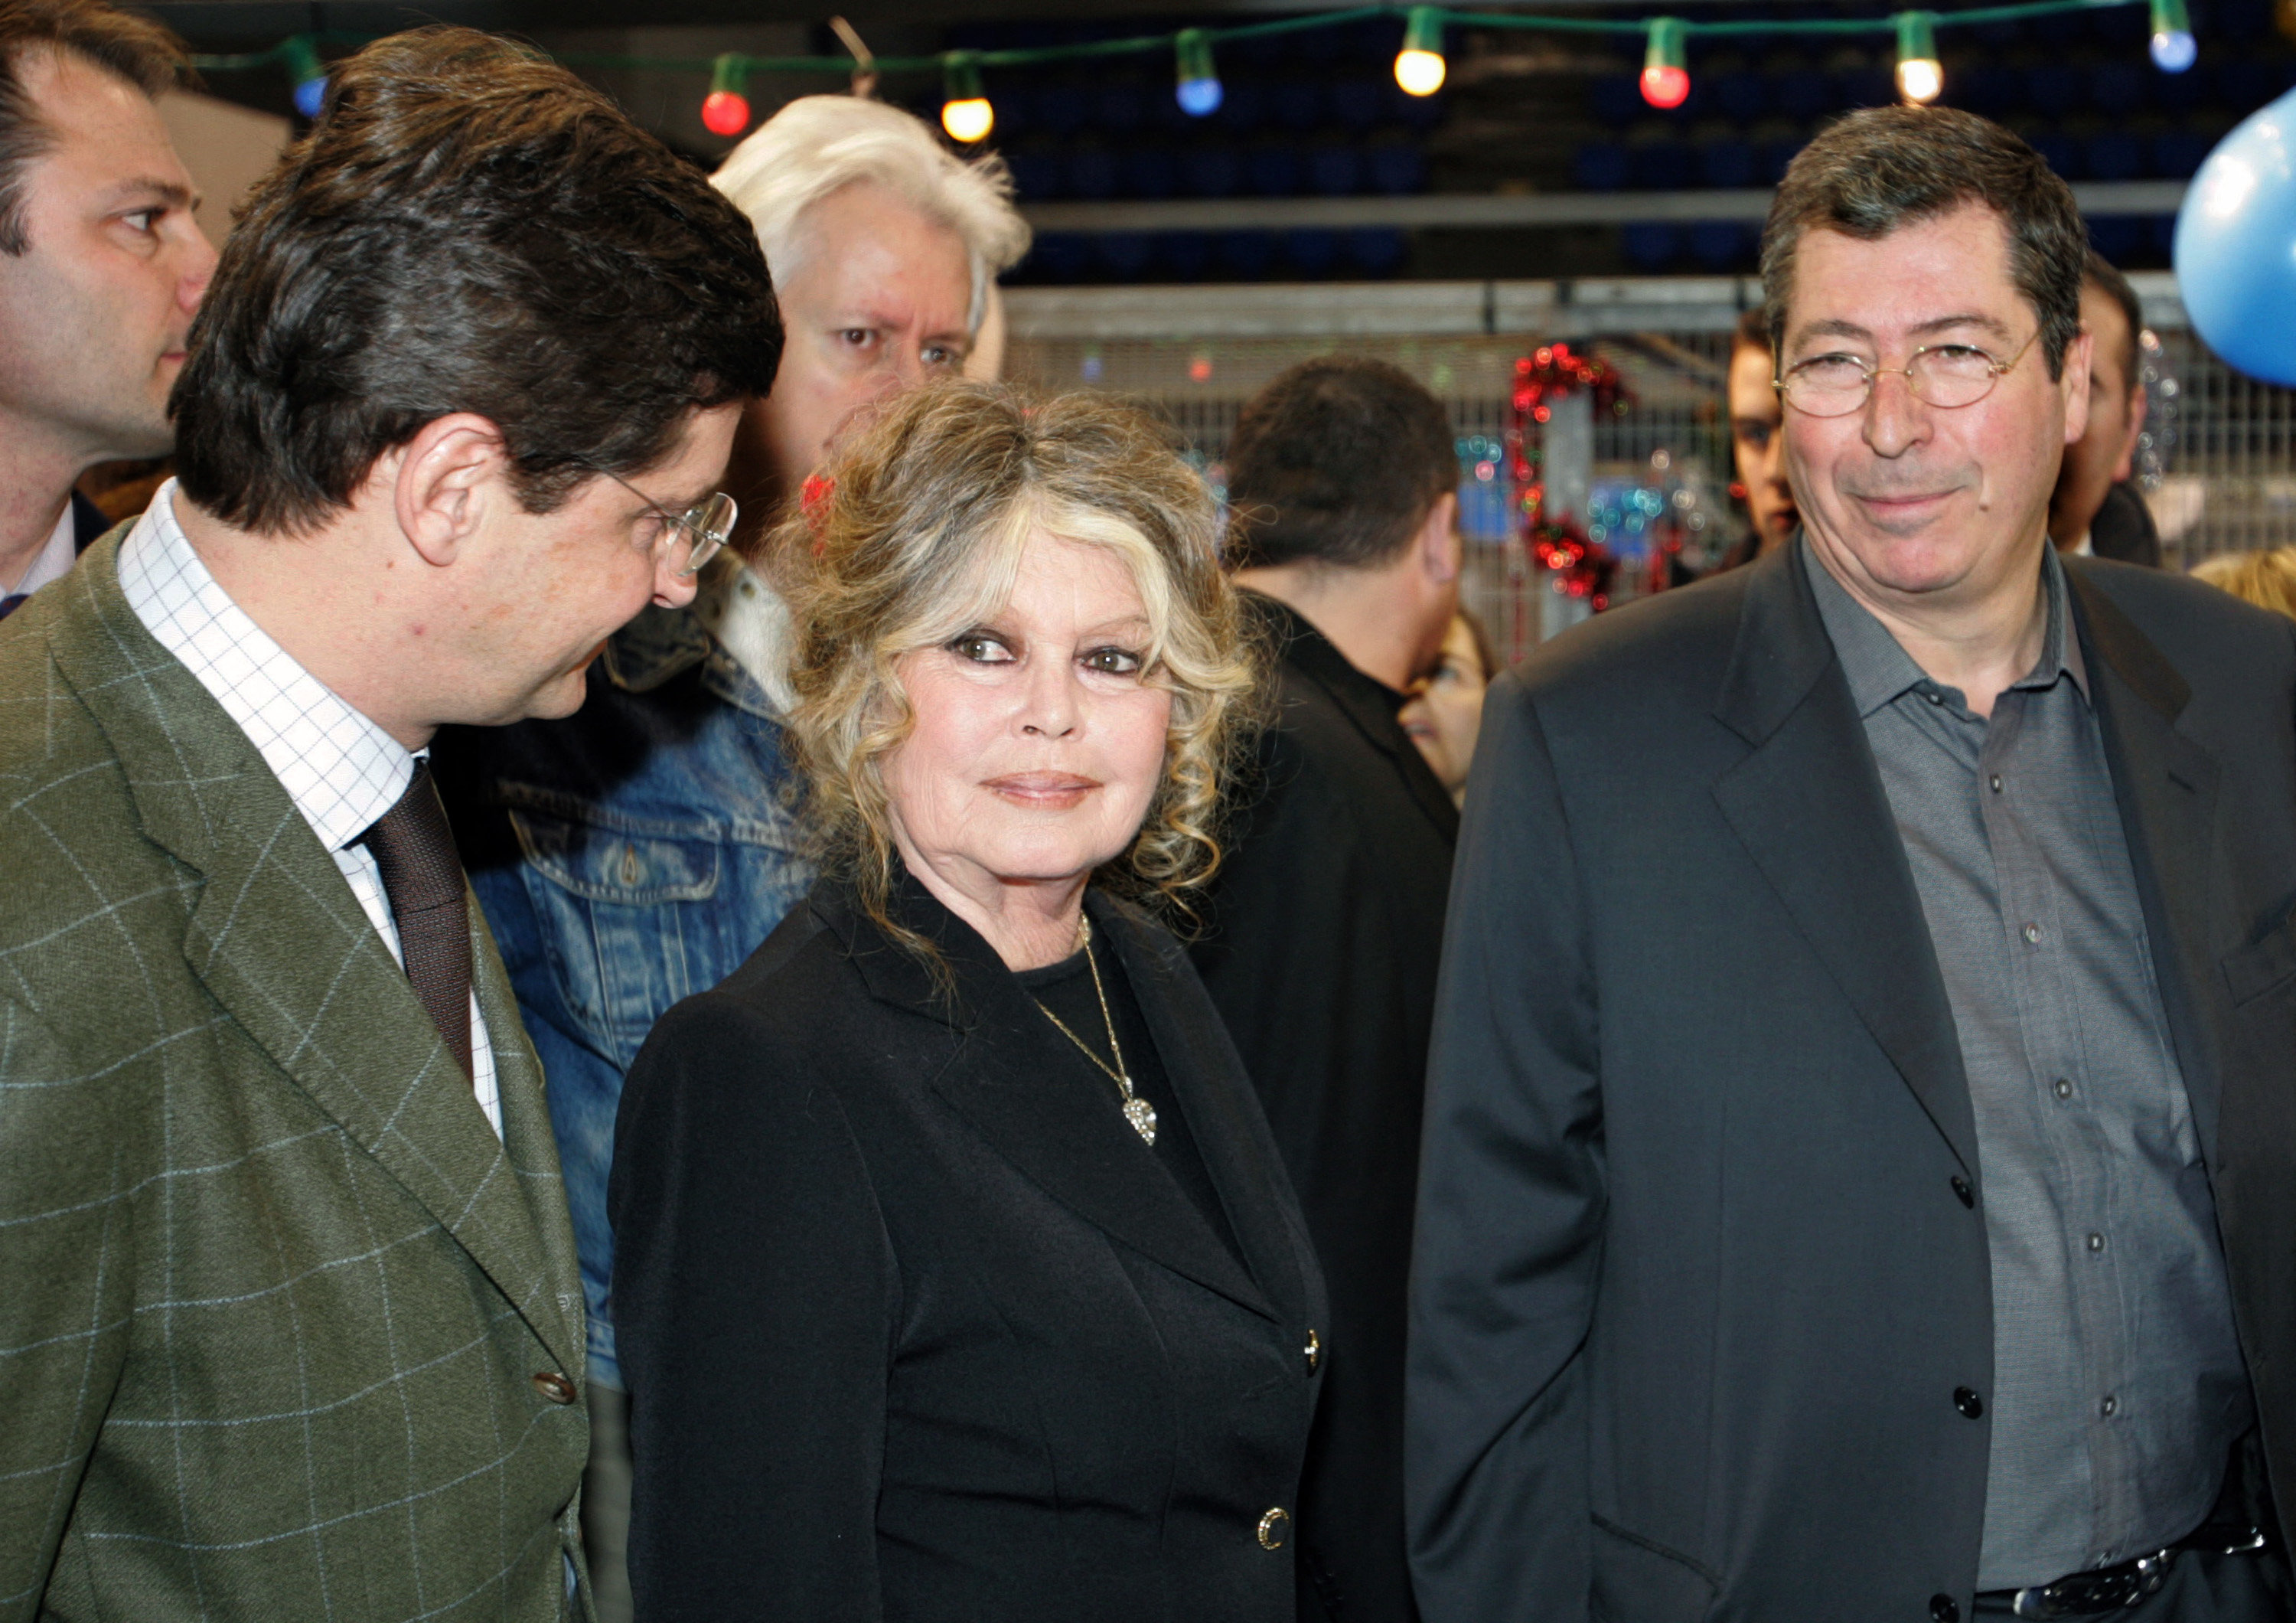 Three individuals at an event, middle person wearing a dark jacket and scarf